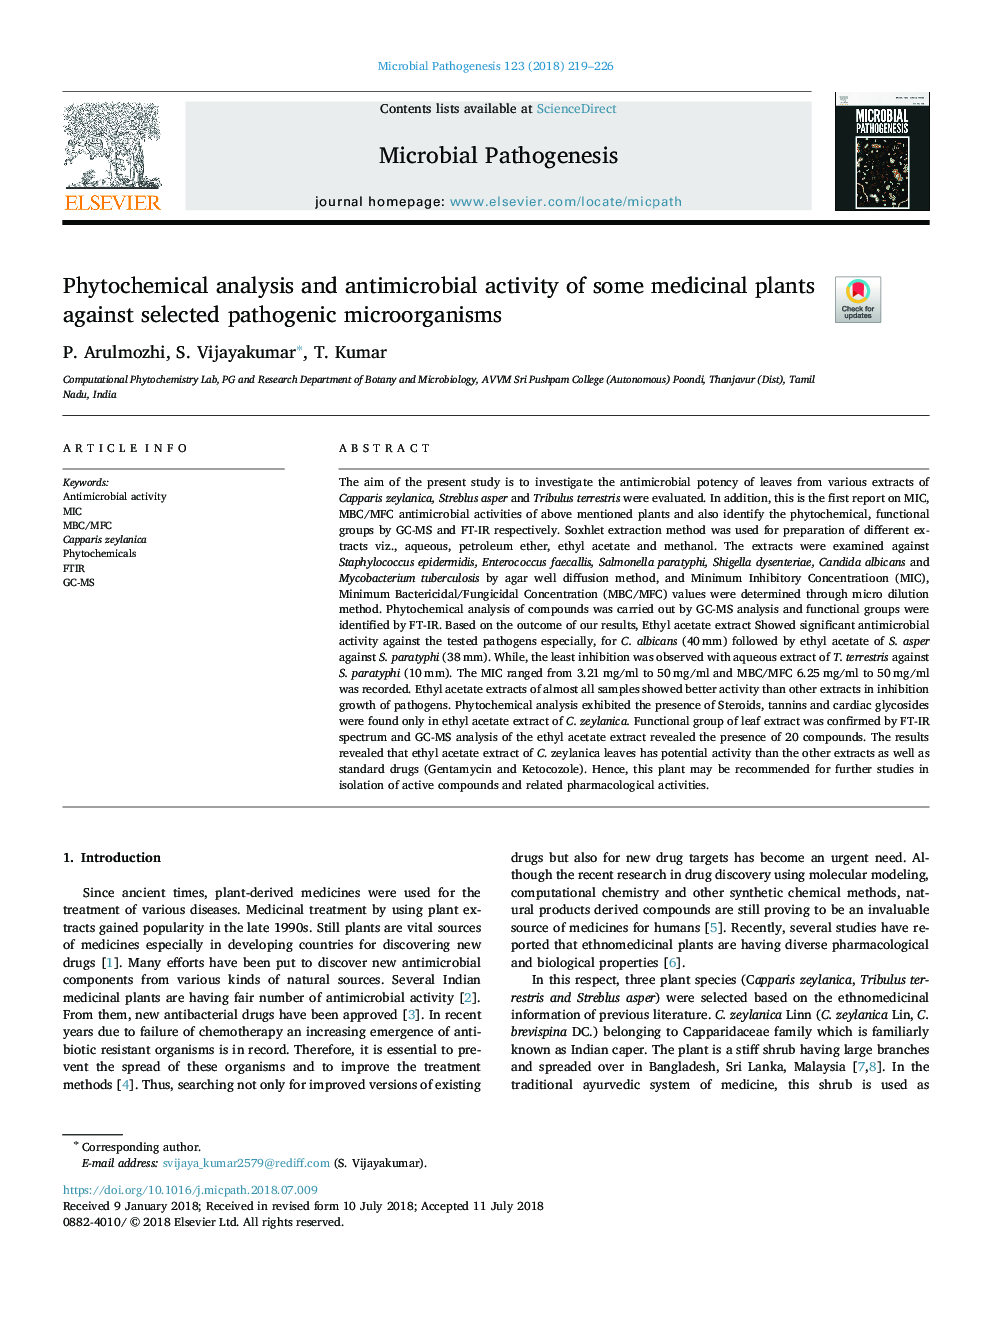 Phytochemical analysis and antimicrobial activity of some medicinal plants against selected pathogenic microorganisms